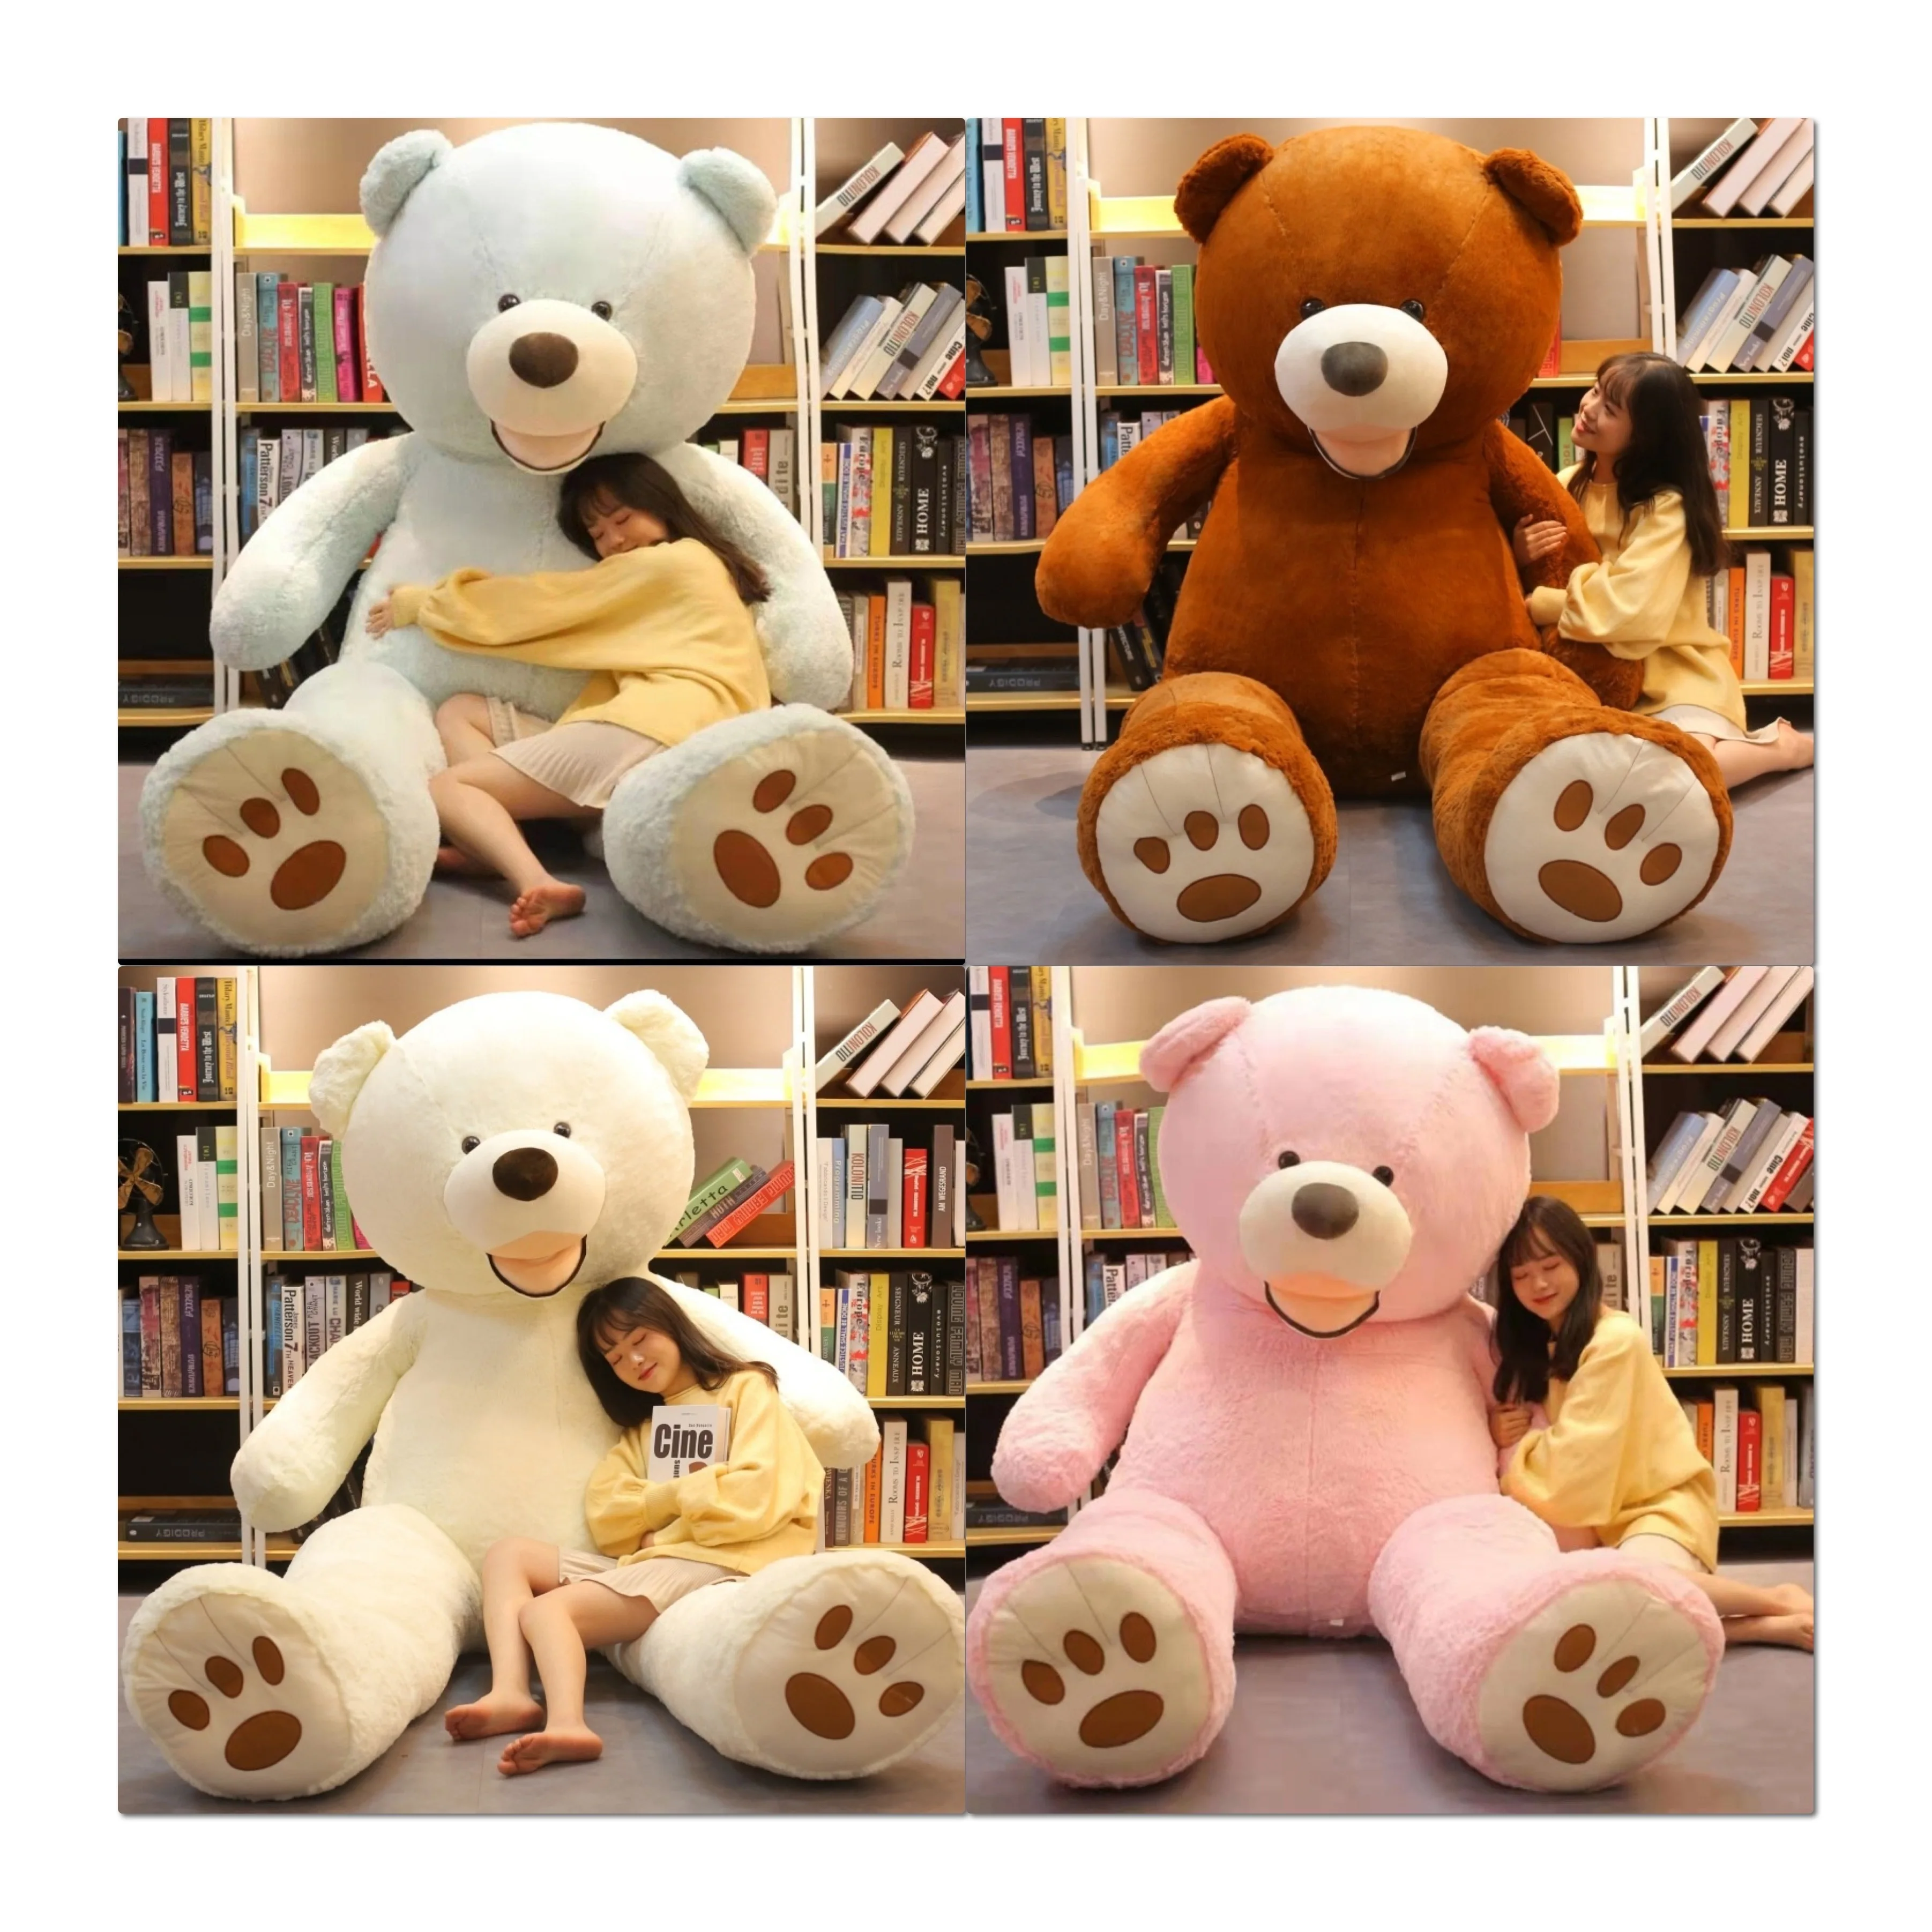 

100CM large size valentine's day teddy bear skin gifts filled with PP cotton osos animal plush big stuffed animal plush toys